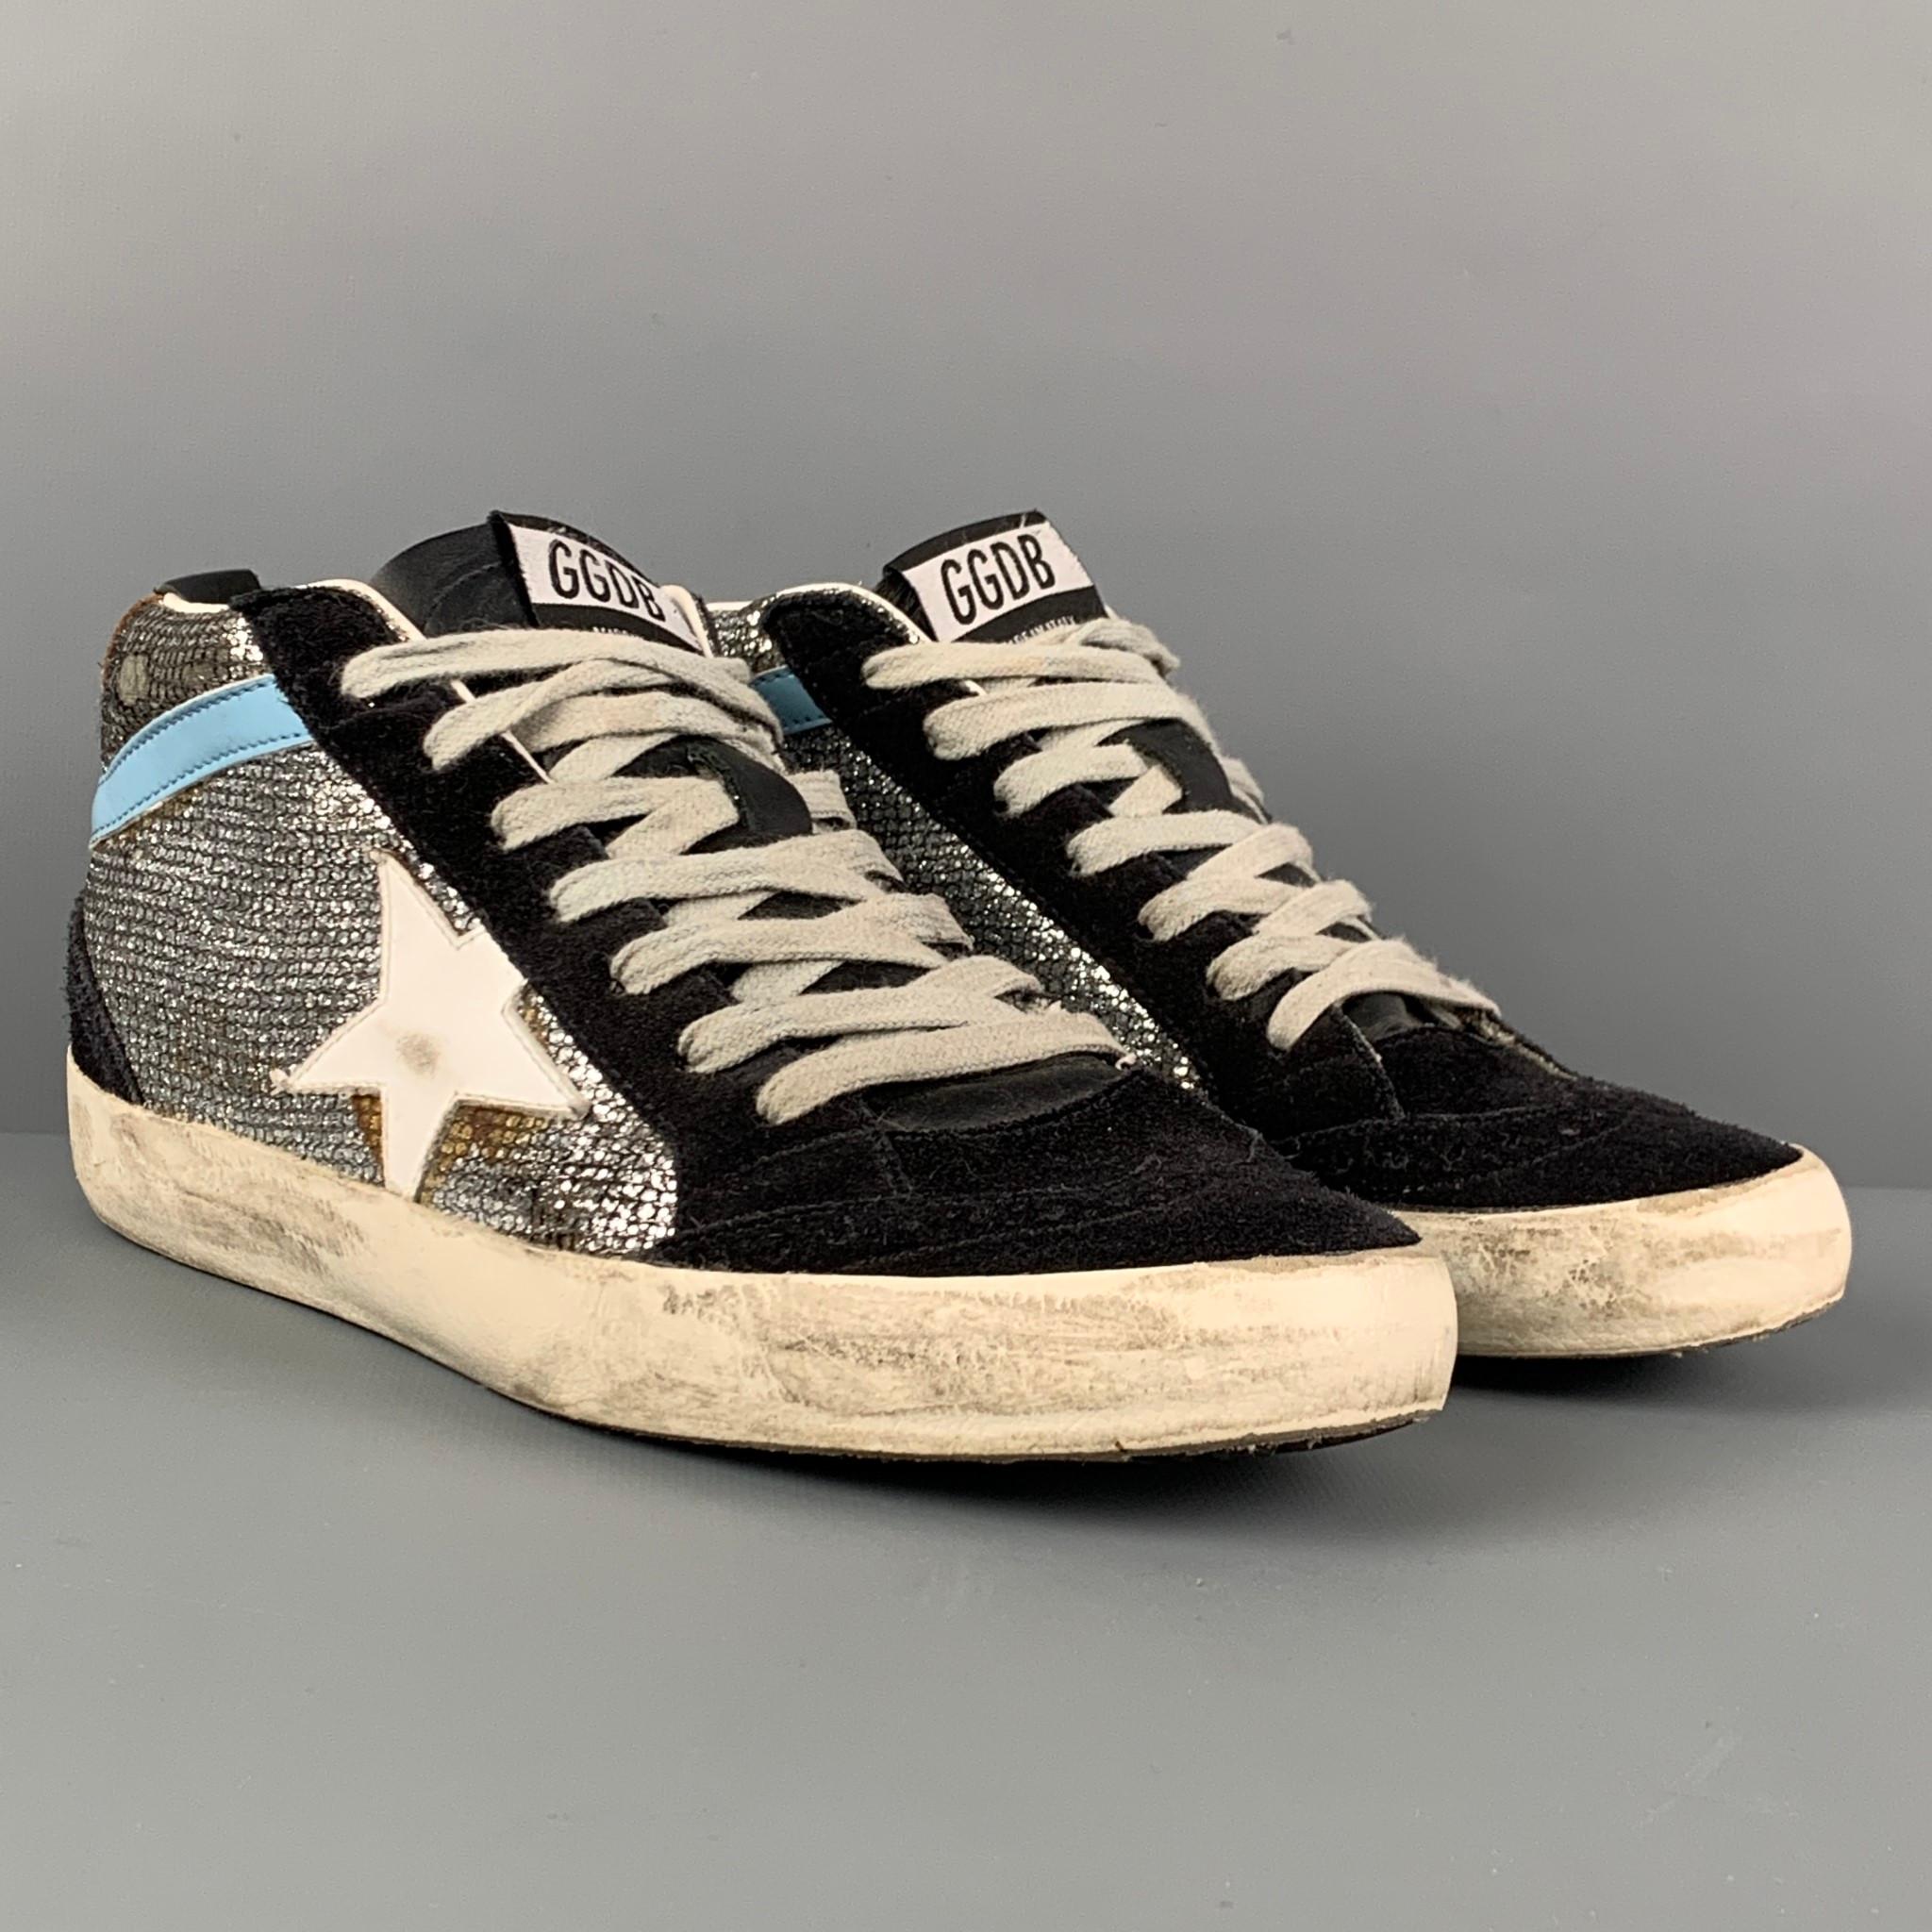 GOLDEN GOOSE sneakers comes in a silver & black suede featuring a metallic panel, signature distressed design, and a lace up closure. Made in Italy. 

Very Good Pre-Owned Condition.
Marked: 37
Original Retail Price: $525.00

Outsole: 10 in. x 3.25 in